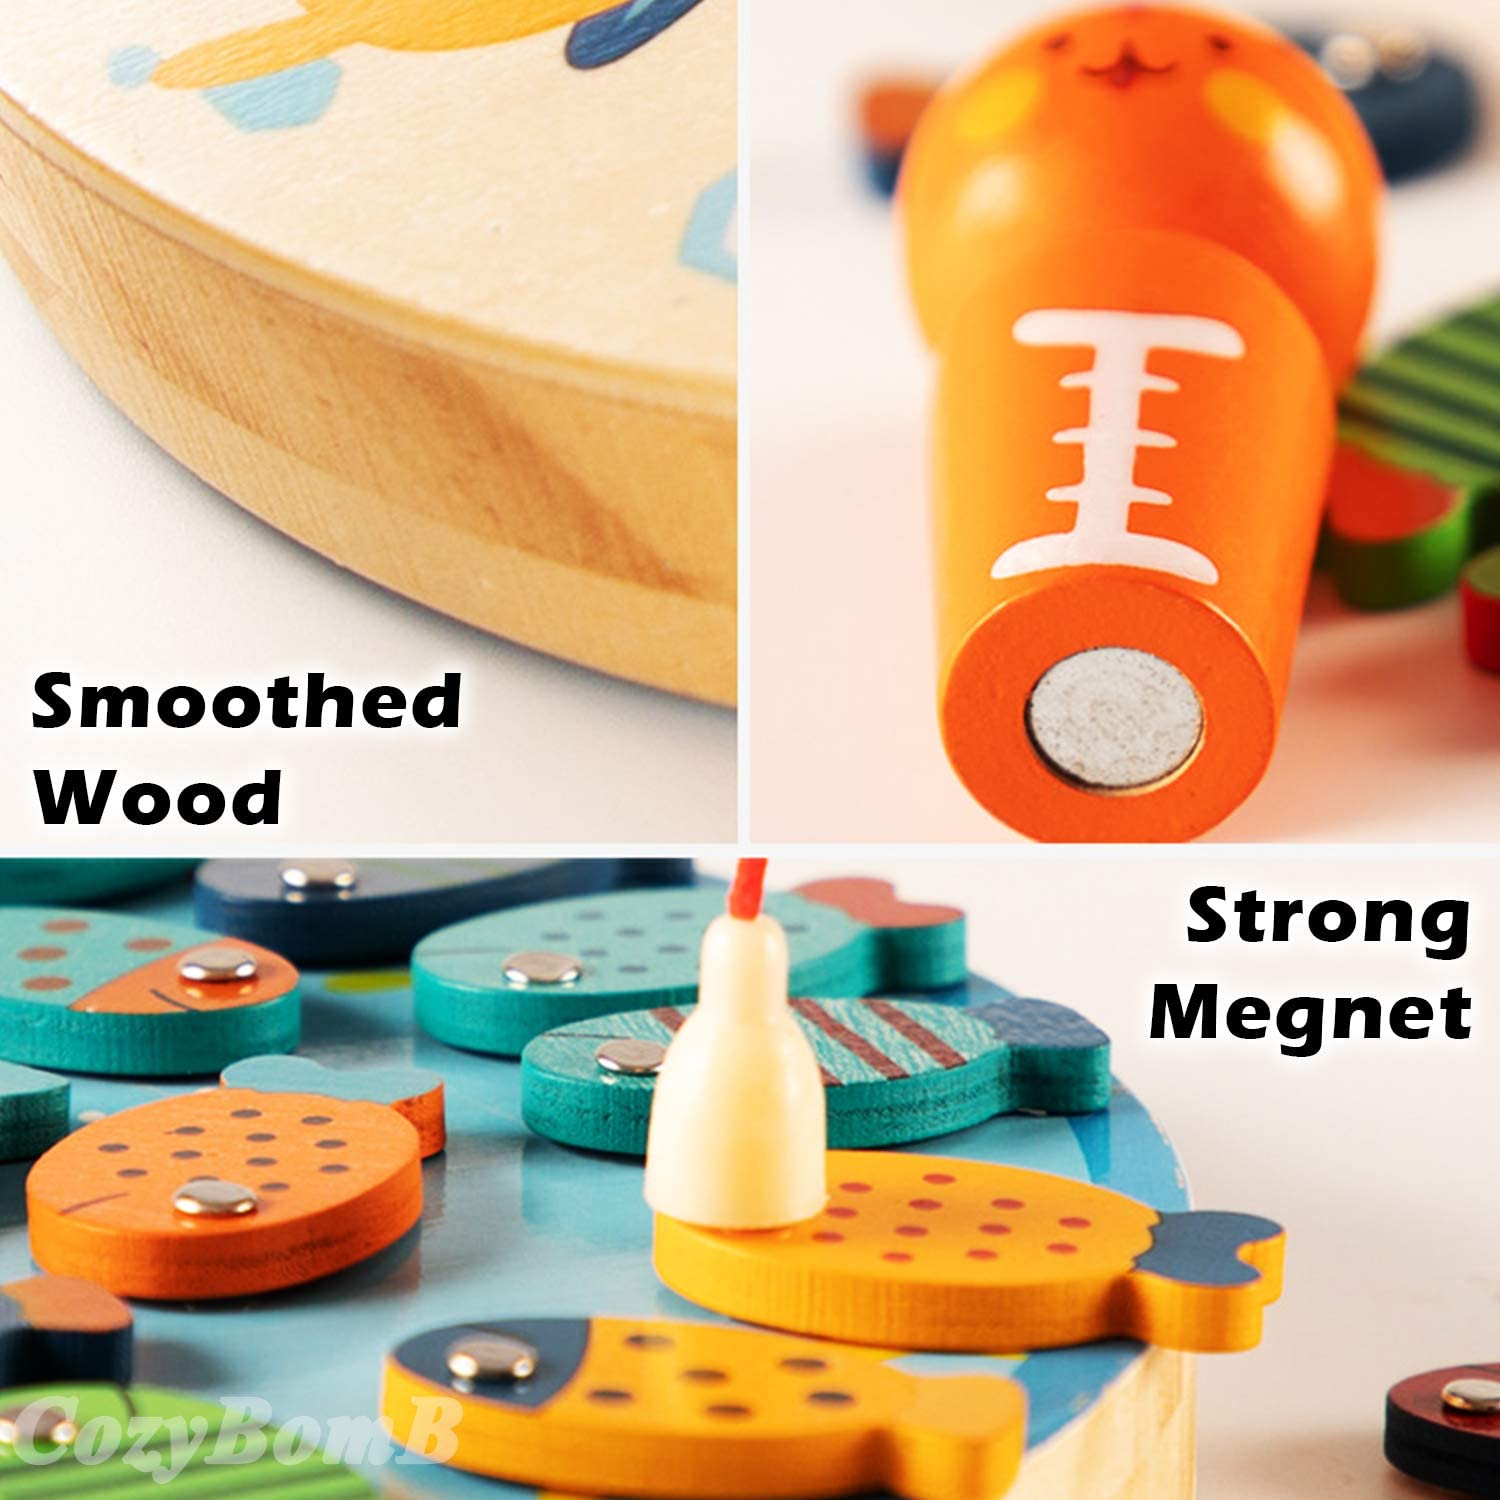 Wooden Magnetic Fishing Game, Hobbies & Toys, Toys & Games on Carousell